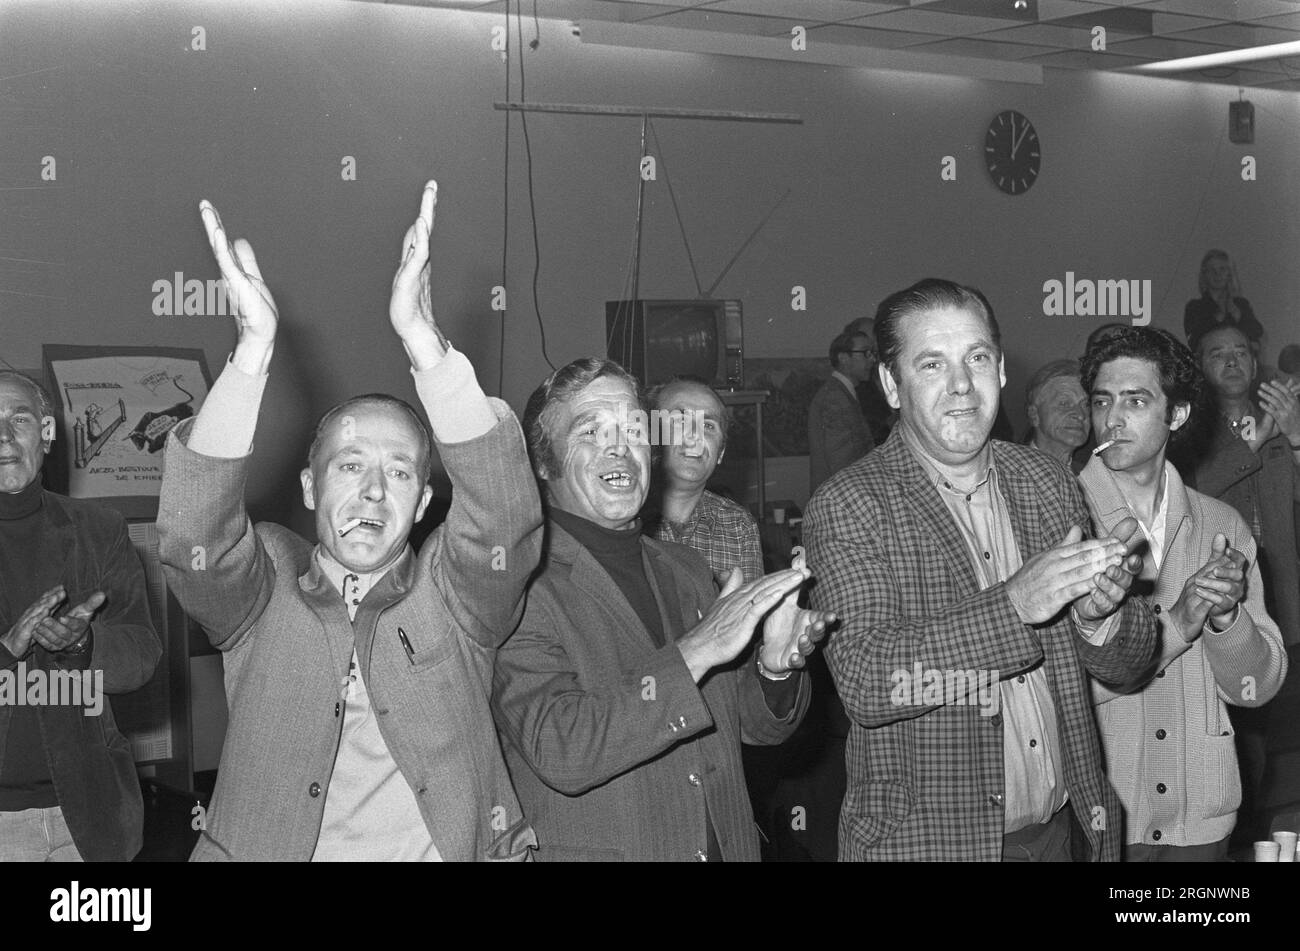 Occupation ENKA Breda is lifted, cheering occupiers ca. September 1972 Stock Photo